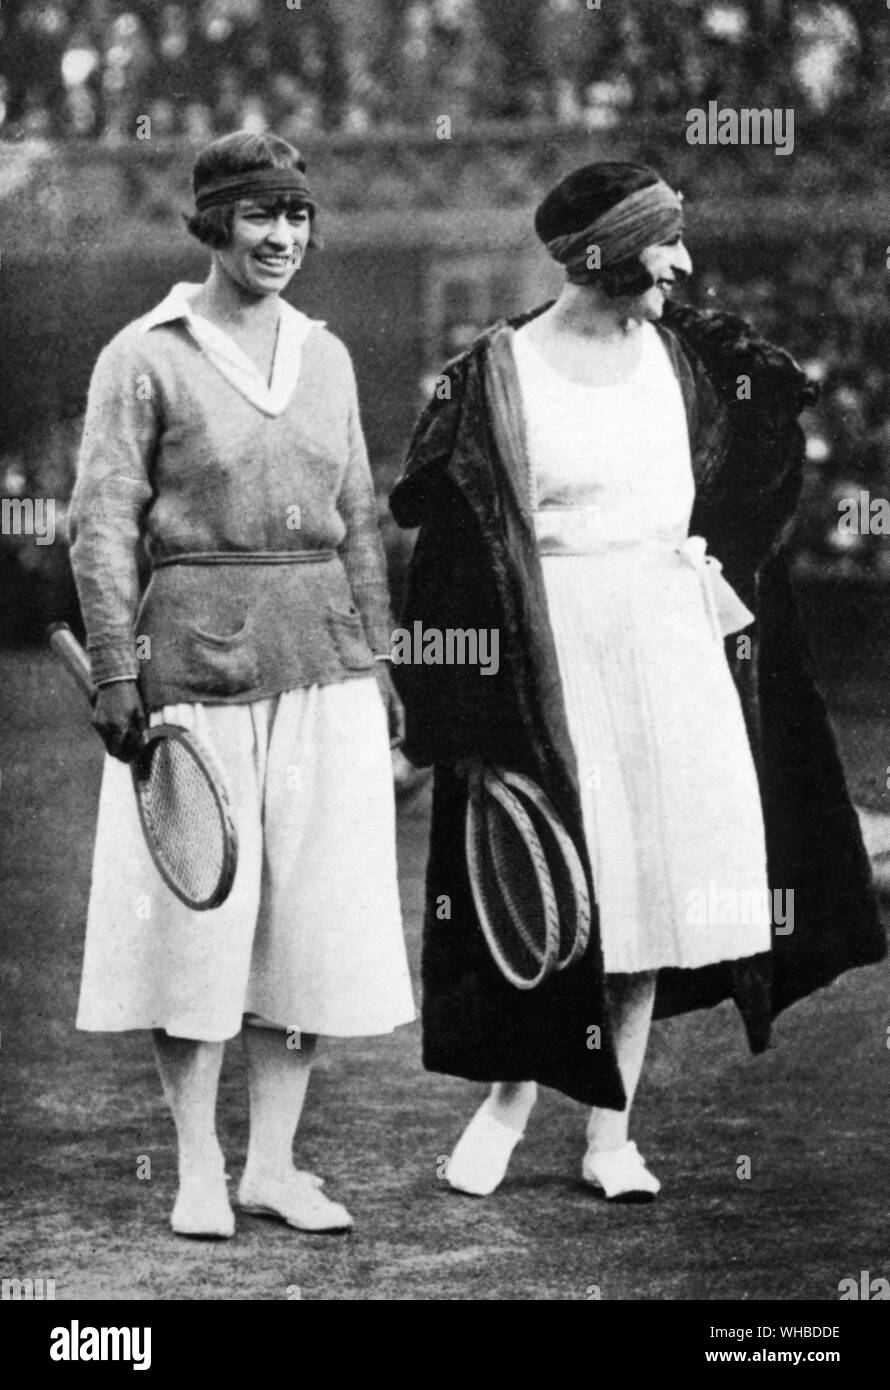 Suzanne Lenglen (1899 - 03 Jun 1926) - Suzanne Rachel Flore Lenglen (24 May 1899 4 July 1938) was a French tennis player who won 31 Grand Slam titles from 1914 through 1926. A flamboyant, trendsetting athlete, she was the first female tennis celebrity and one of the first international female sport stars, named La Divine (the divine one) by the French press.. Stock Photo